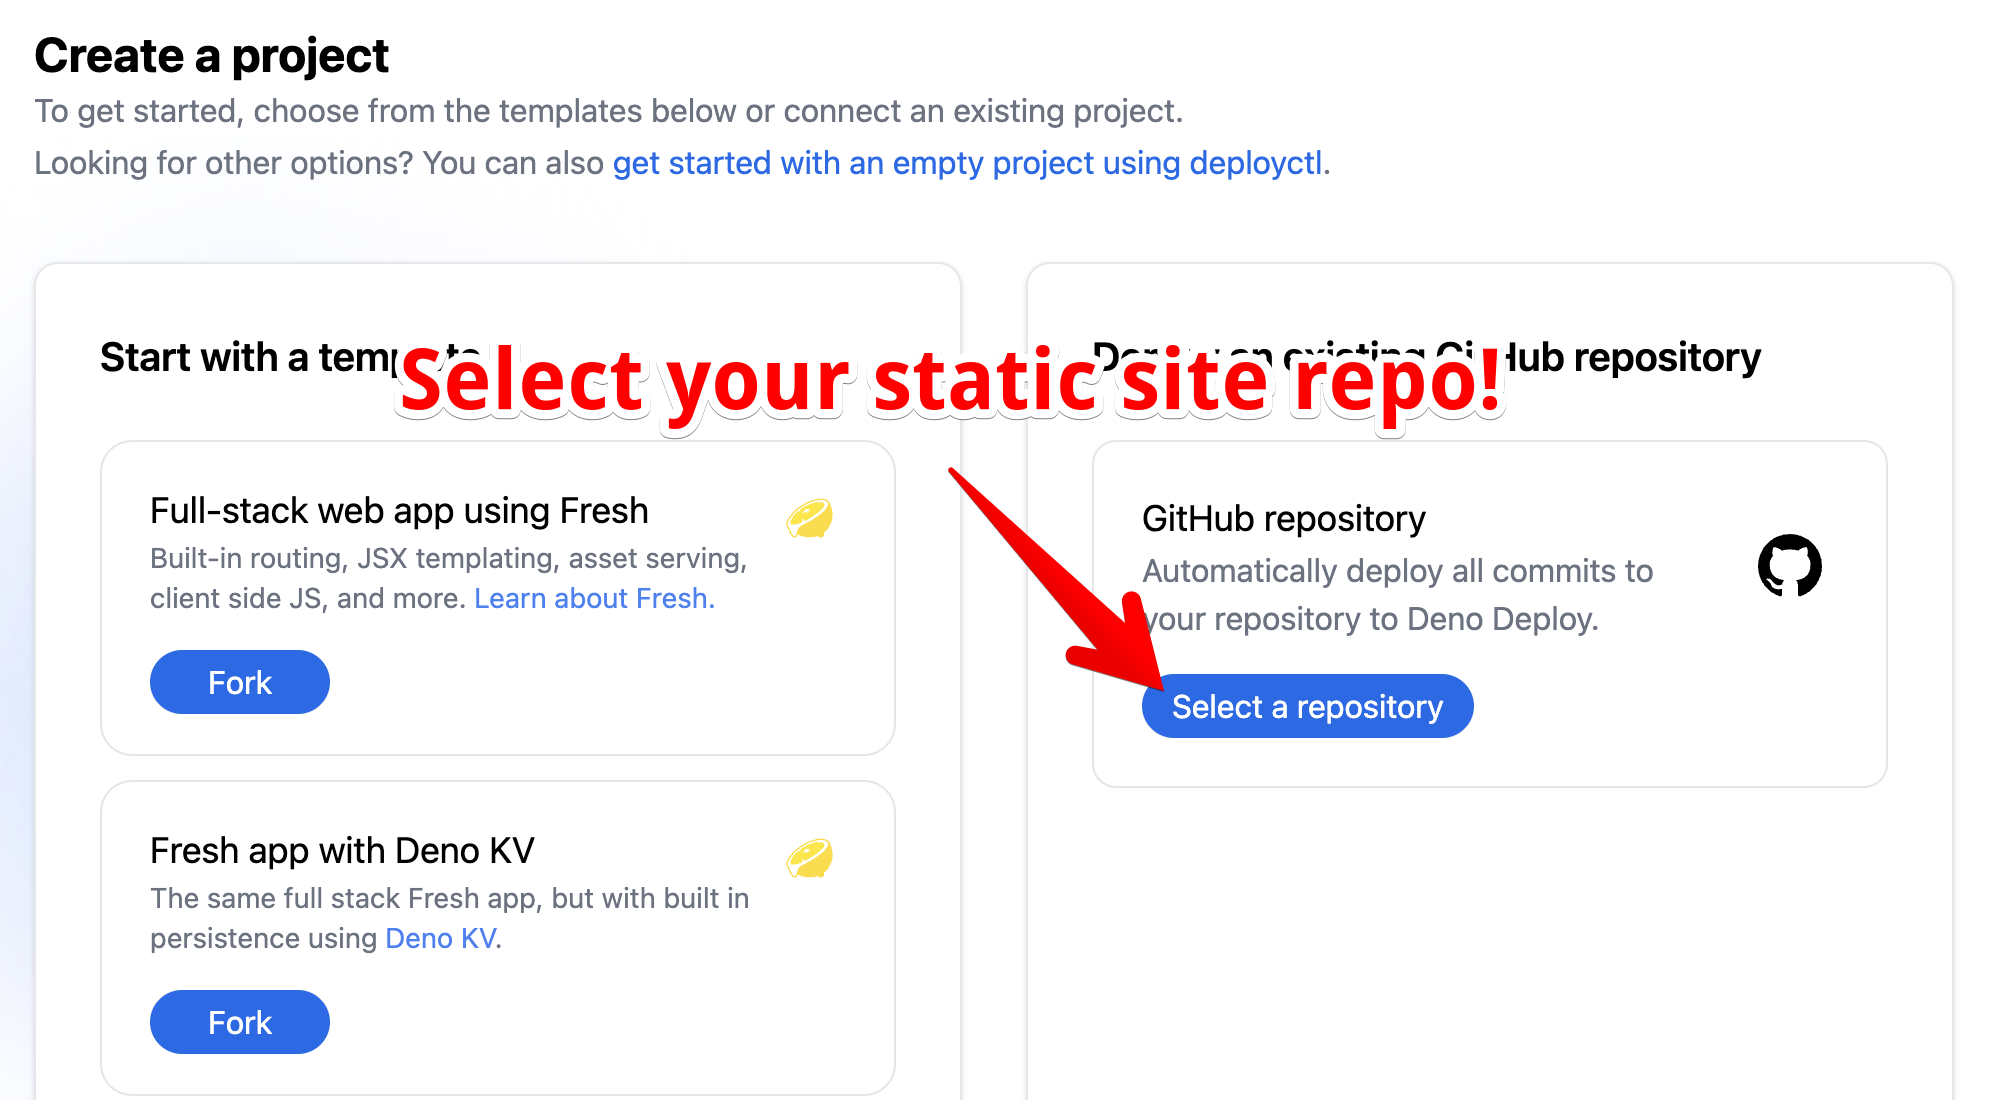 create a new Deploy project from an existing GitHub repo